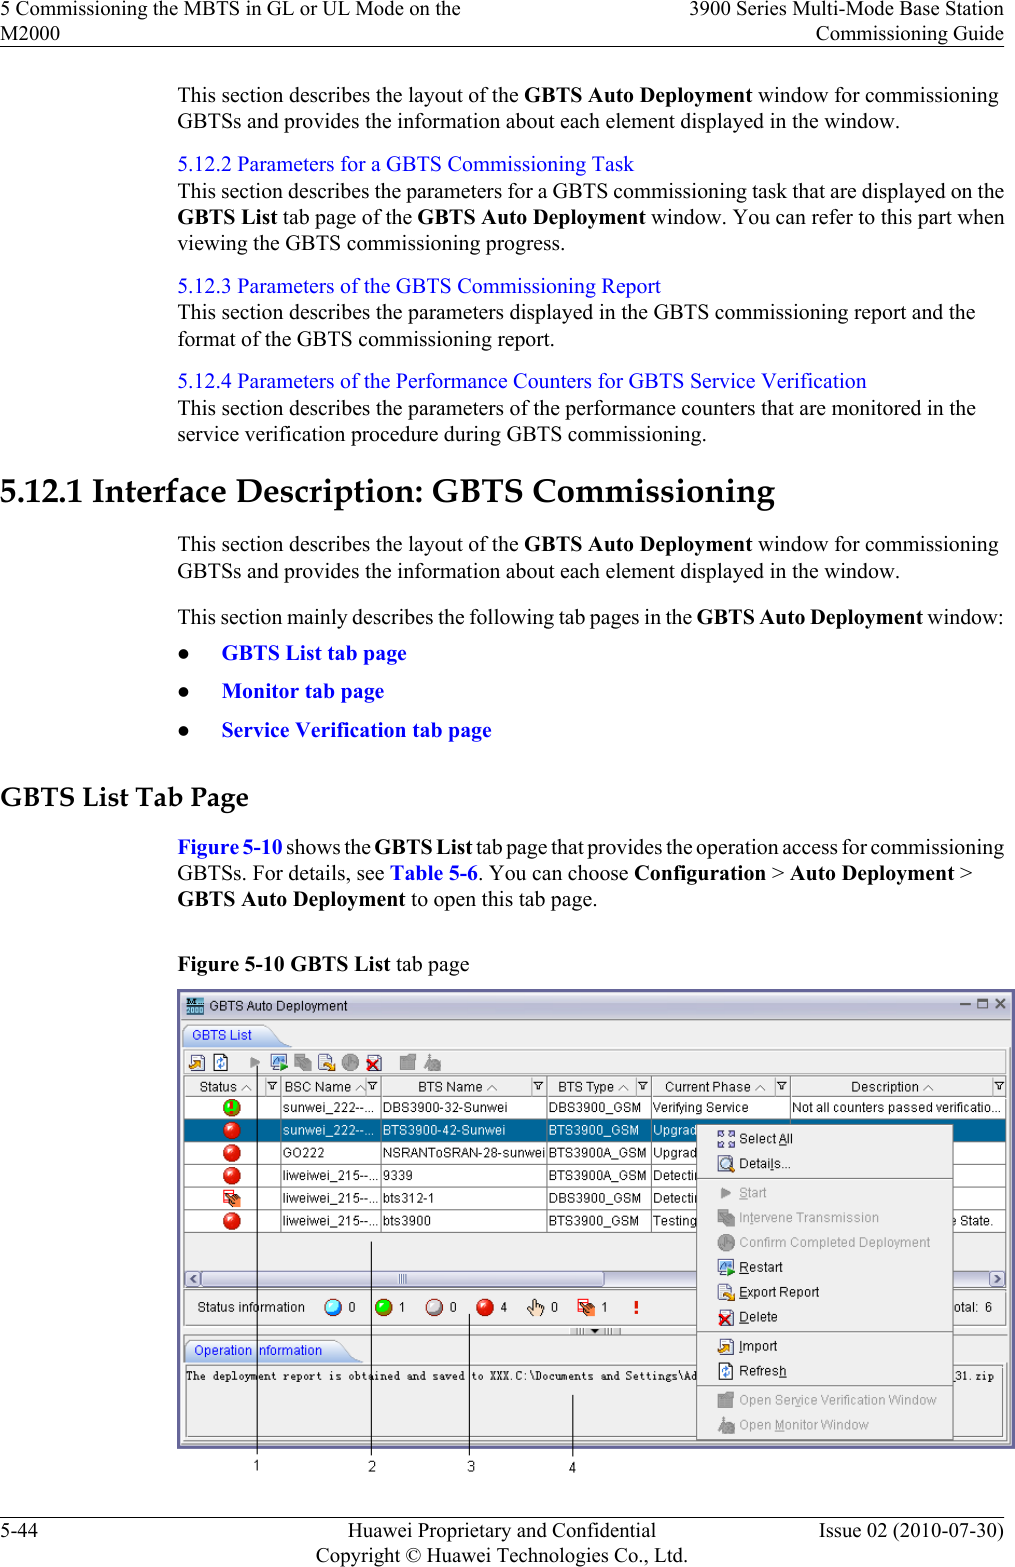 This section describes the layout of the GBTS Auto Deployment window for commissioningGBTSs and provides the information about each element displayed in the window.5.12.2 Parameters for a GBTS Commissioning TaskThis section describes the parameters for a GBTS commissioning task that are displayed on theGBTS List tab page of the GBTS Auto Deployment window. You can refer to this part whenviewing the GBTS commissioning progress.5.12.3 Parameters of the GBTS Commissioning ReportThis section describes the parameters displayed in the GBTS commissioning report and theformat of the GBTS commissioning report.5.12.4 Parameters of the Performance Counters for GBTS Service VerificationThis section describes the parameters of the performance counters that are monitored in theservice verification procedure during GBTS commissioning.5.12.1 Interface Description: GBTS CommissioningThis section describes the layout of the GBTS Auto Deployment window for commissioningGBTSs and provides the information about each element displayed in the window.This section mainly describes the following tab pages in the GBTS Auto Deployment window:lGBTS List tab pagelMonitor tab pagelService Verification tab pageGBTS List Tab PageFigure 5-10 shows the GBTS List tab page that provides the operation access for commissioningGBTSs. For details, see Table 5-6. You can choose Configuration &gt; Auto Deployment &gt;GBTS Auto Deployment to open this tab page.Figure 5-10 GBTS List tab page5 Commissioning the MBTS in GL or UL Mode on theM20003900 Series Multi-Mode Base StationCommissioning Guide5-44 Huawei Proprietary and ConfidentialCopyright © Huawei Technologies Co., Ltd.Issue 02 (2010-07-30)